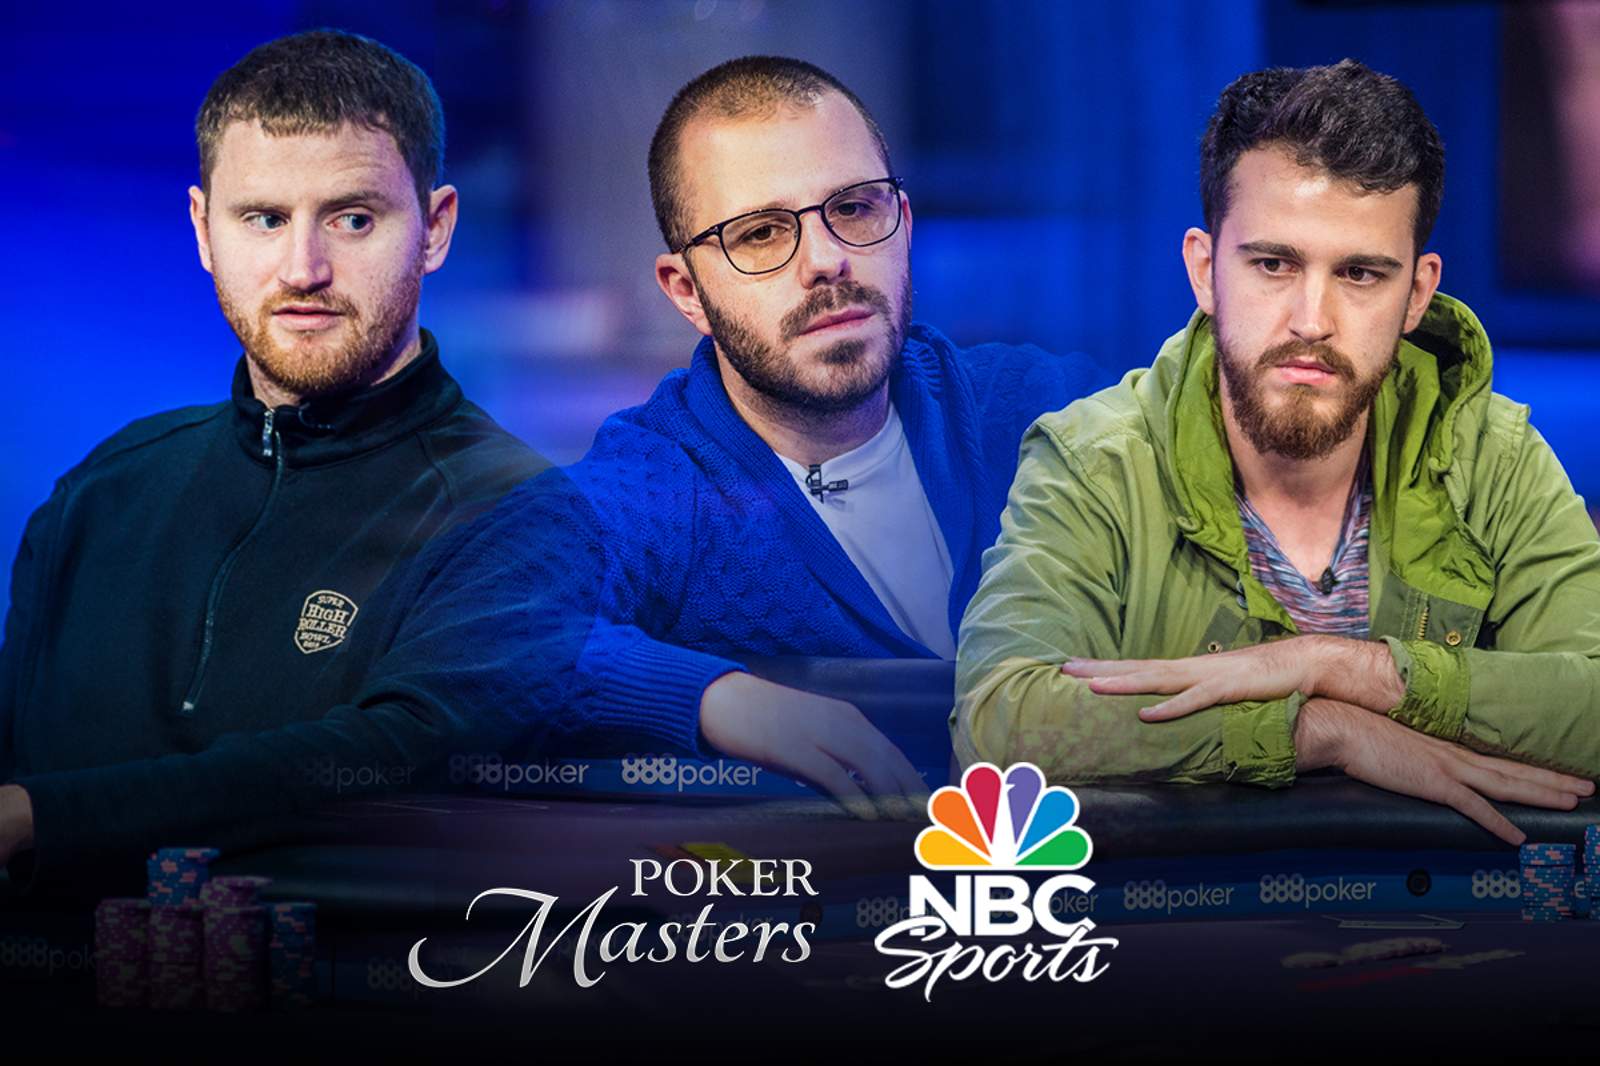 The Poker Masters $100k Main Event Debuts on NBC Sports!